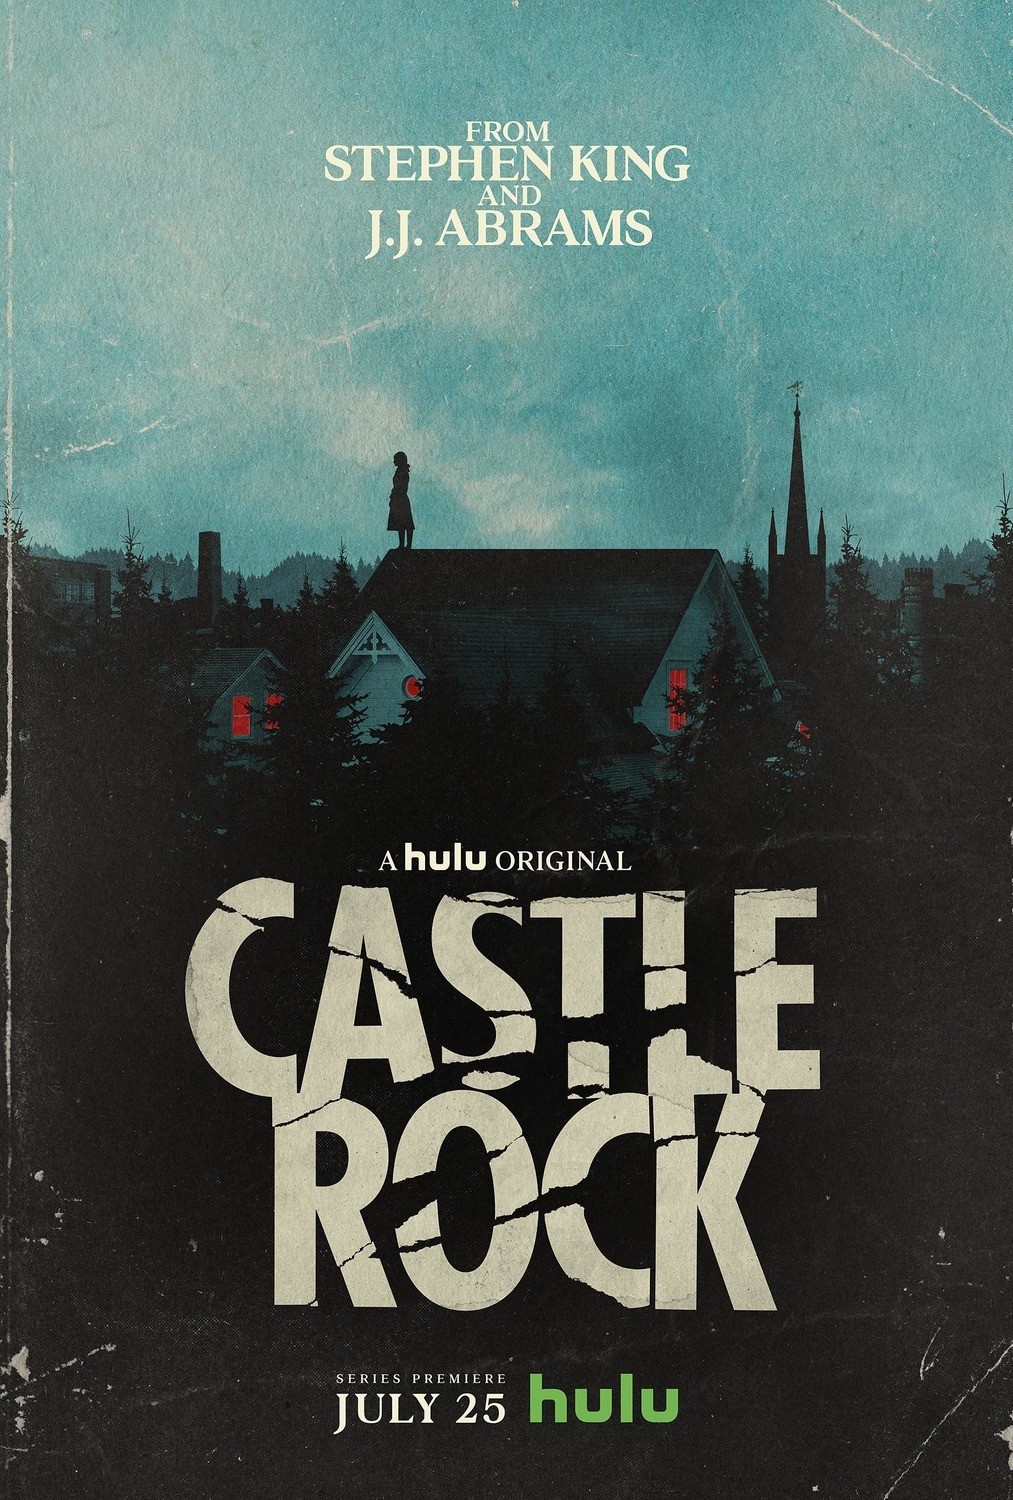 5 TV Shows To Binge Watch This November - Castle Rock